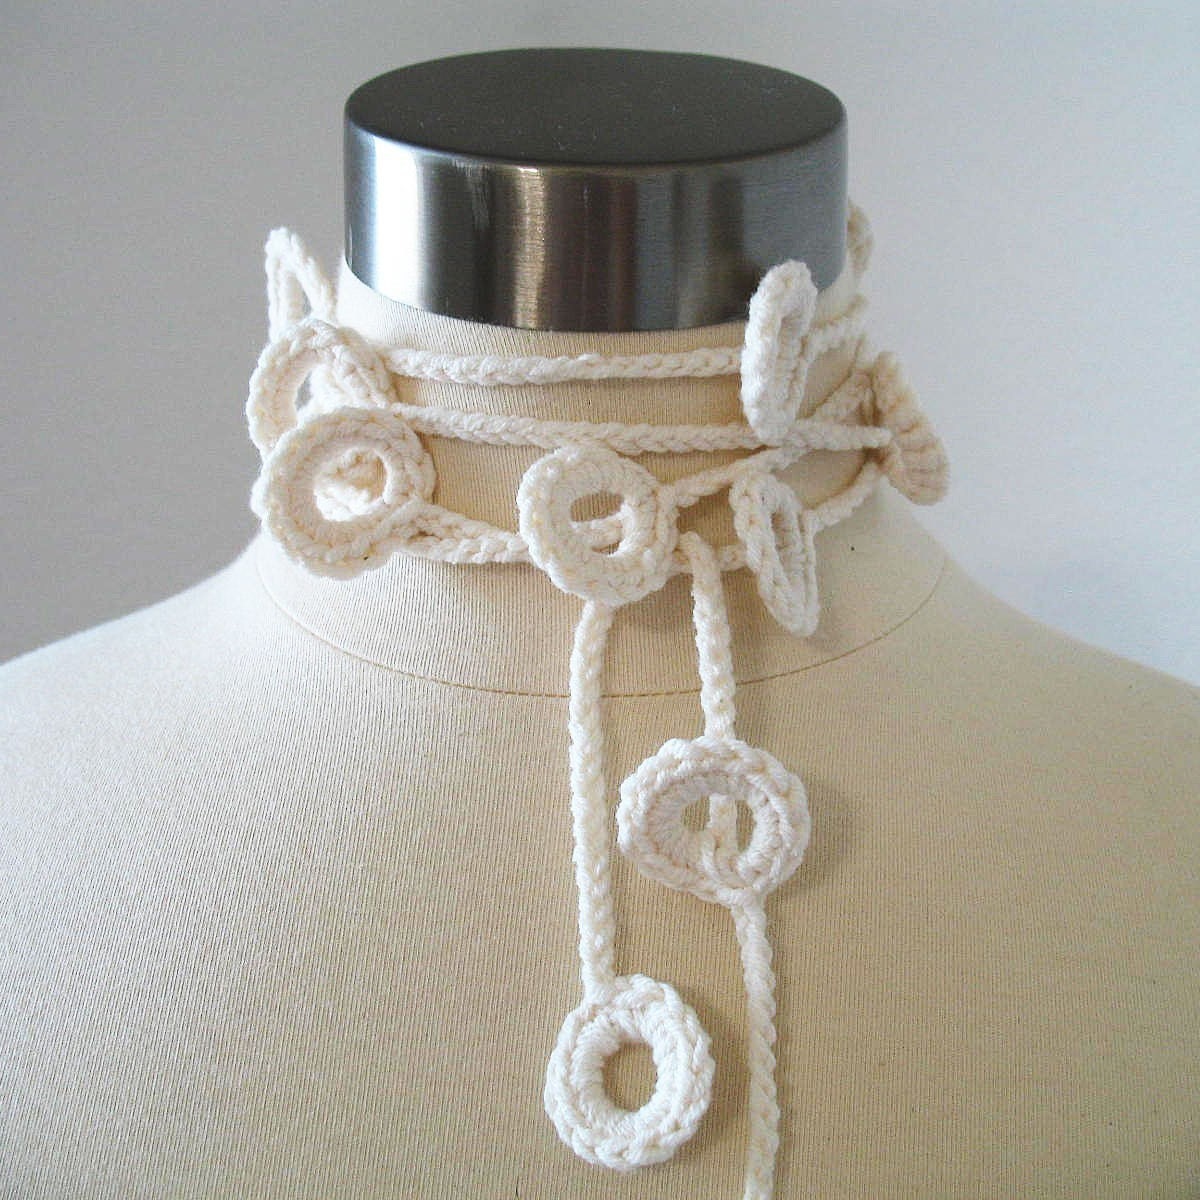 Loopy Loops Lariat - Women Whimsical, Delicate, Light, All Season, Spring, Summer, Fiber Jewelry in Vanilla Cream